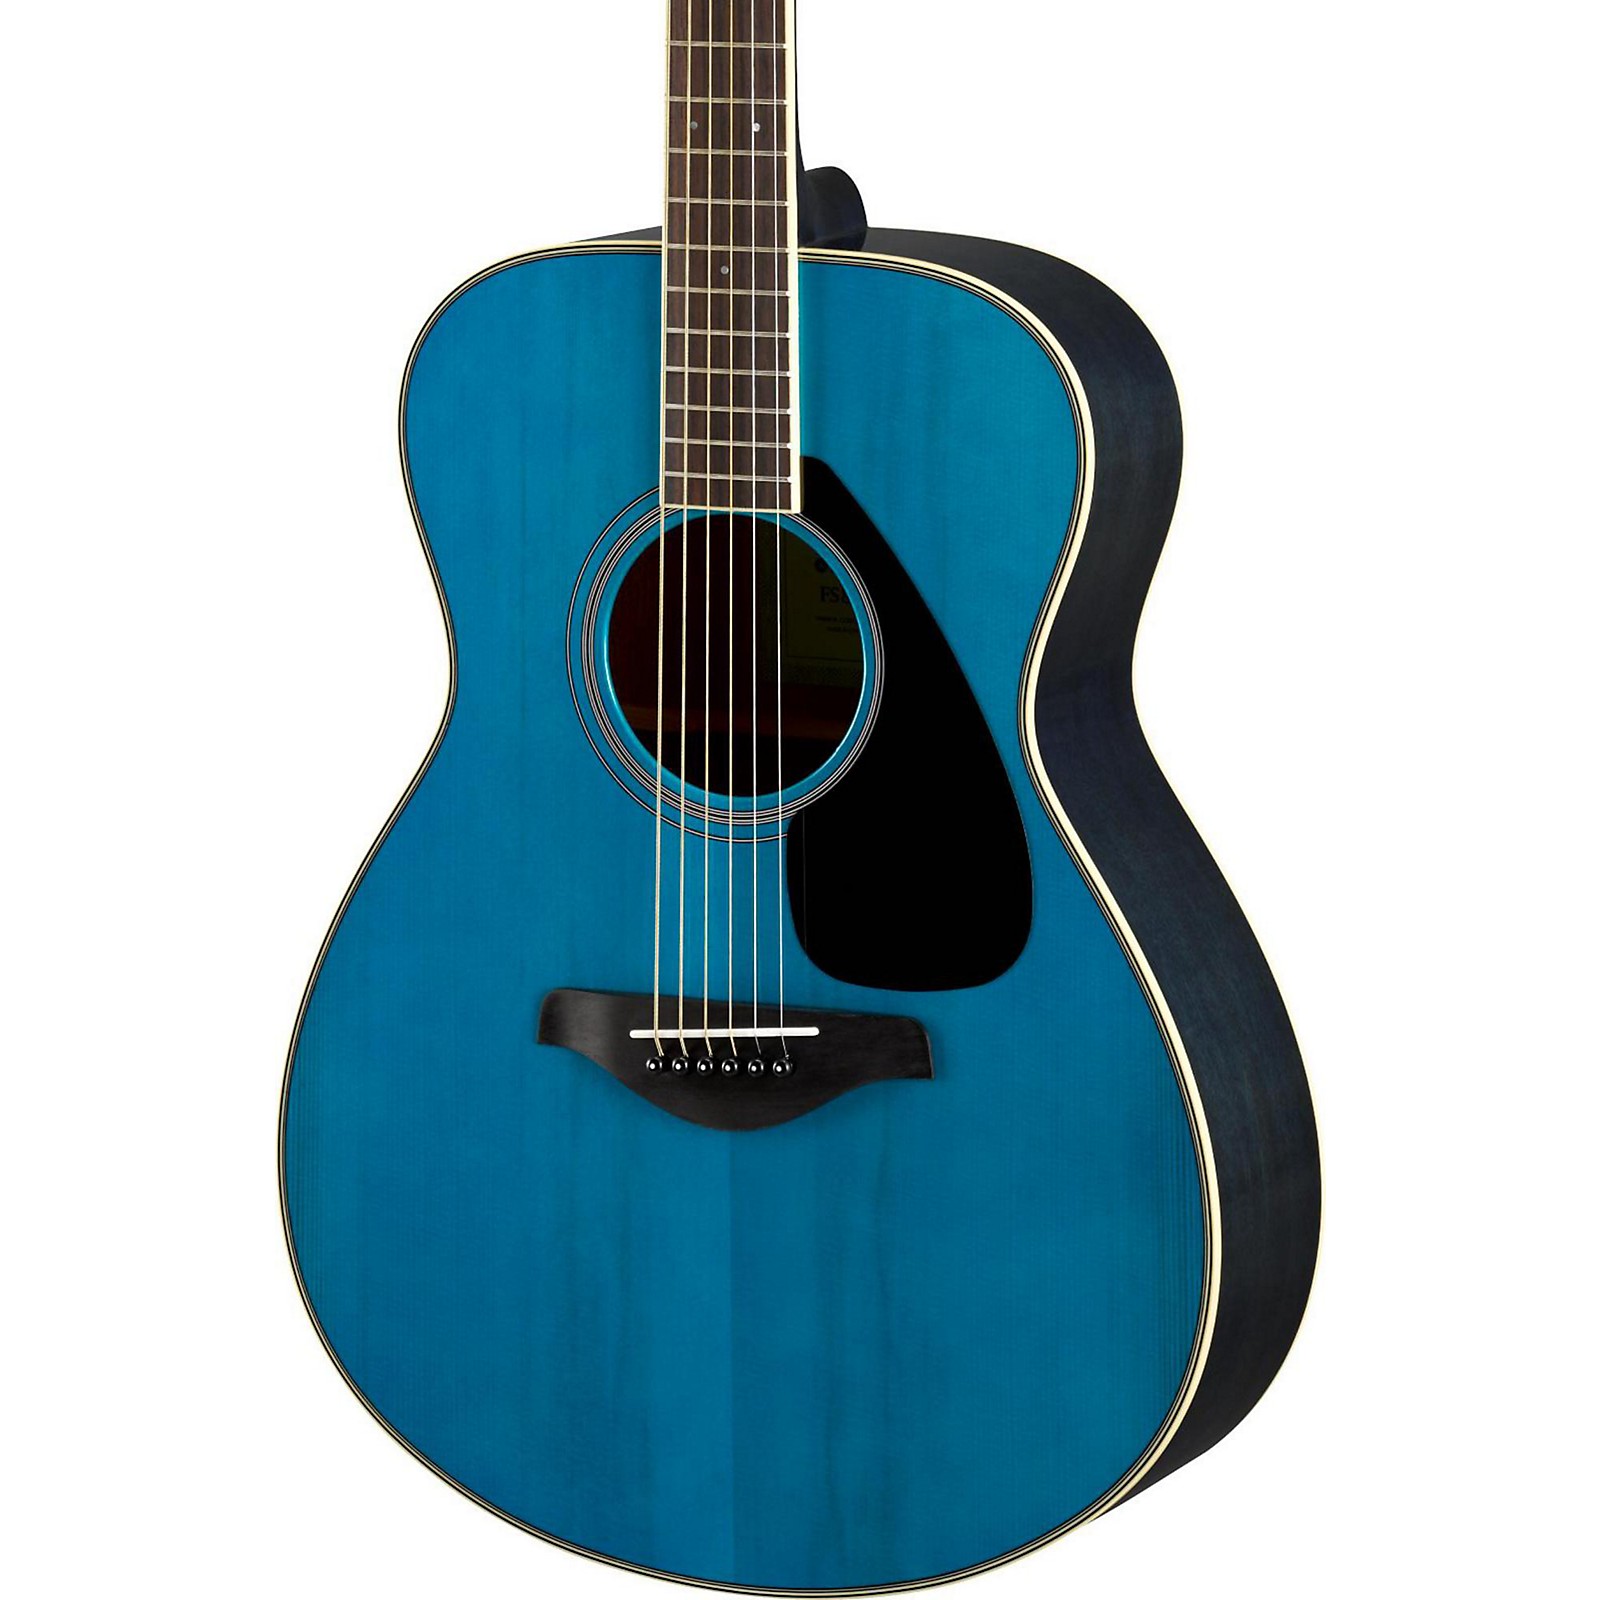 Yamaha FS820 Small Body Acoustic Guitar Turquoise | Guitar Center